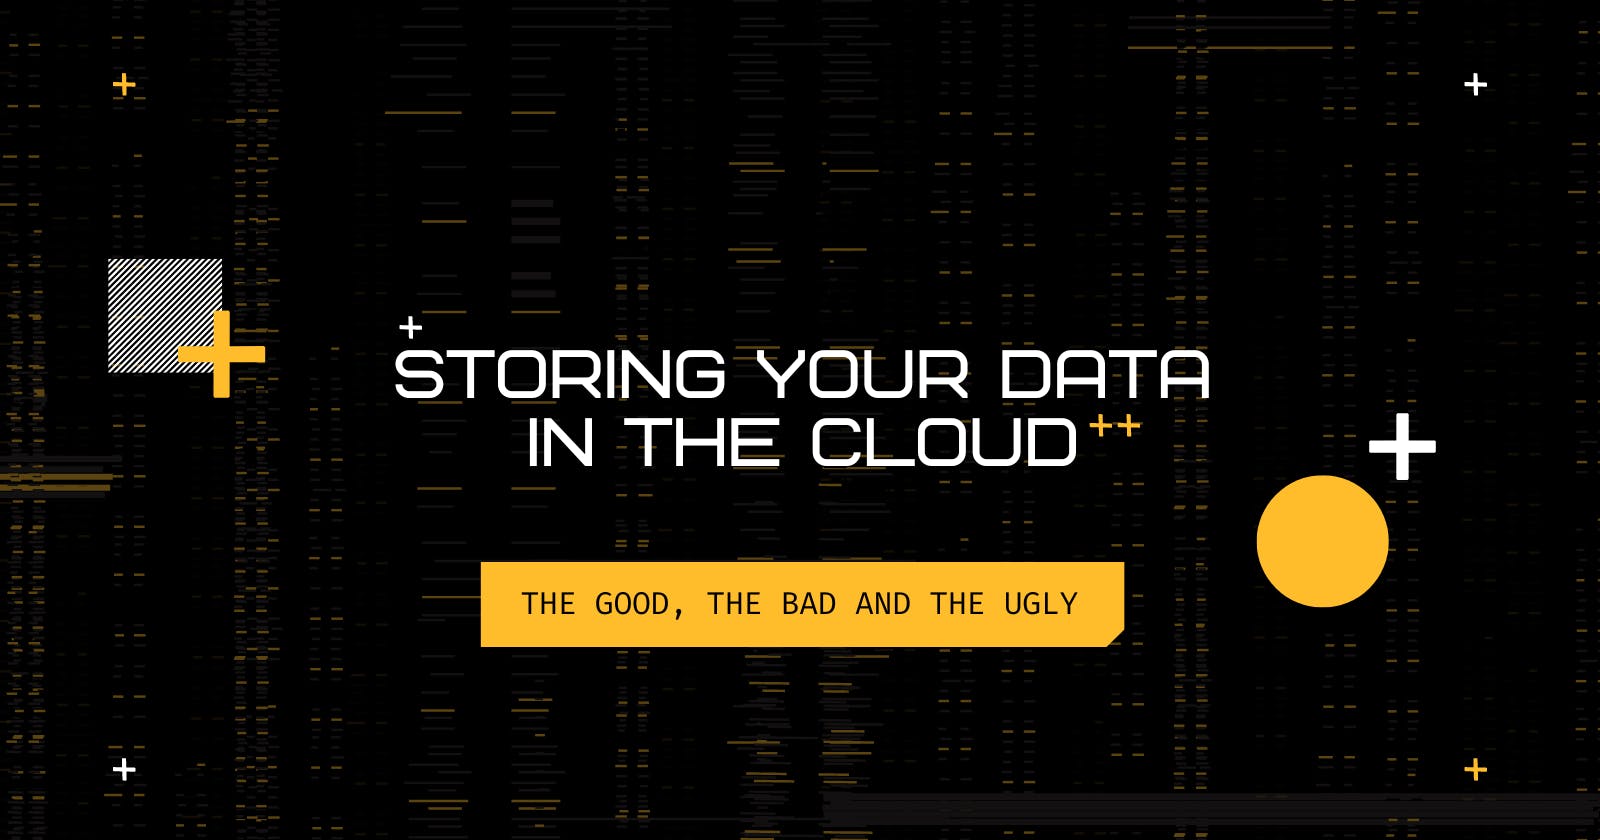 Storing your Data in the Cloud - The Good, The Bad and The Ugly